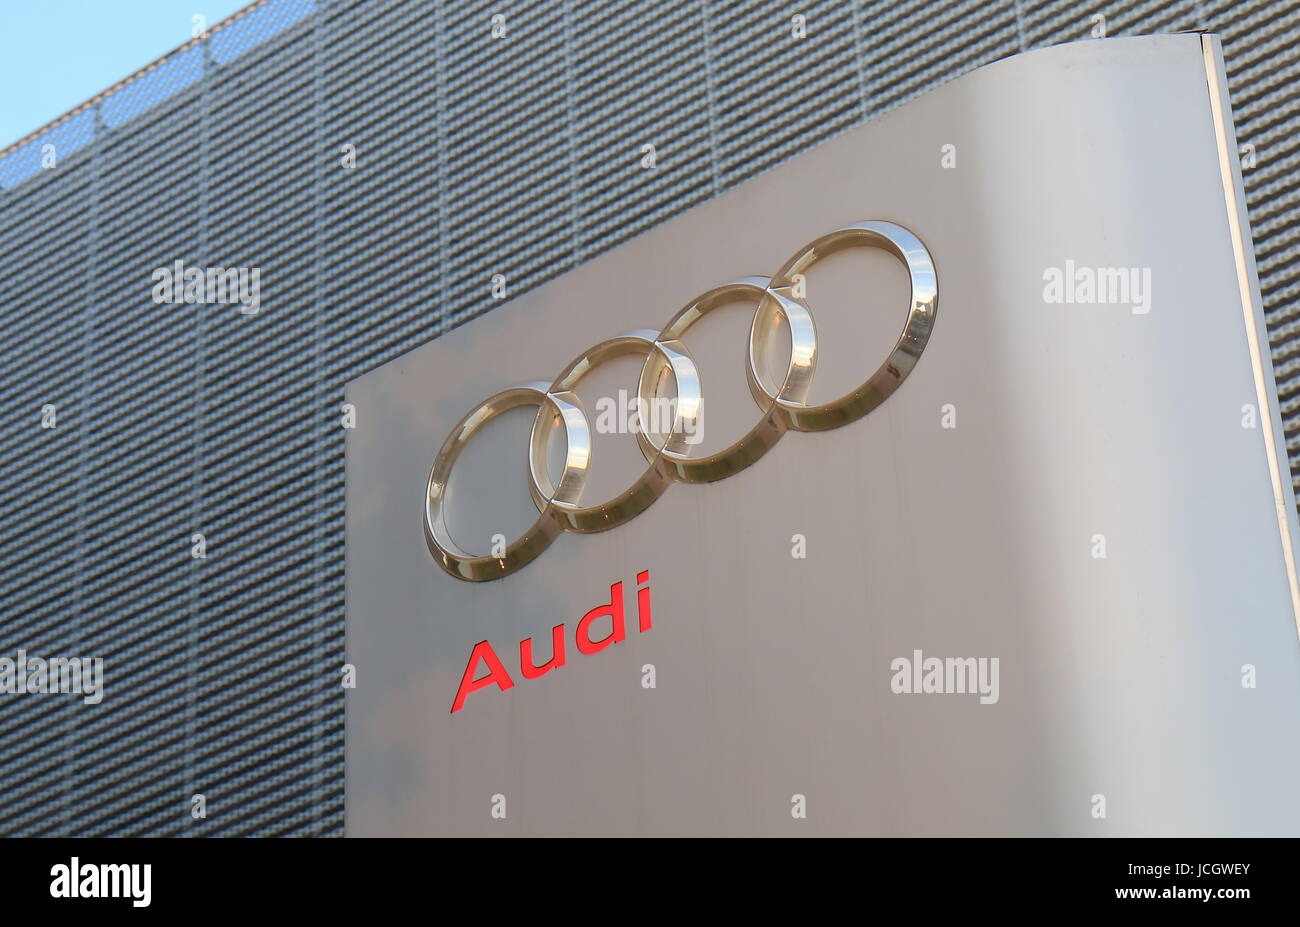 Audi car manufacturer. Audi is a German automobile manufacturer that designs, engineers, produces, markets and distributes luxury vehicles. Stock Photo